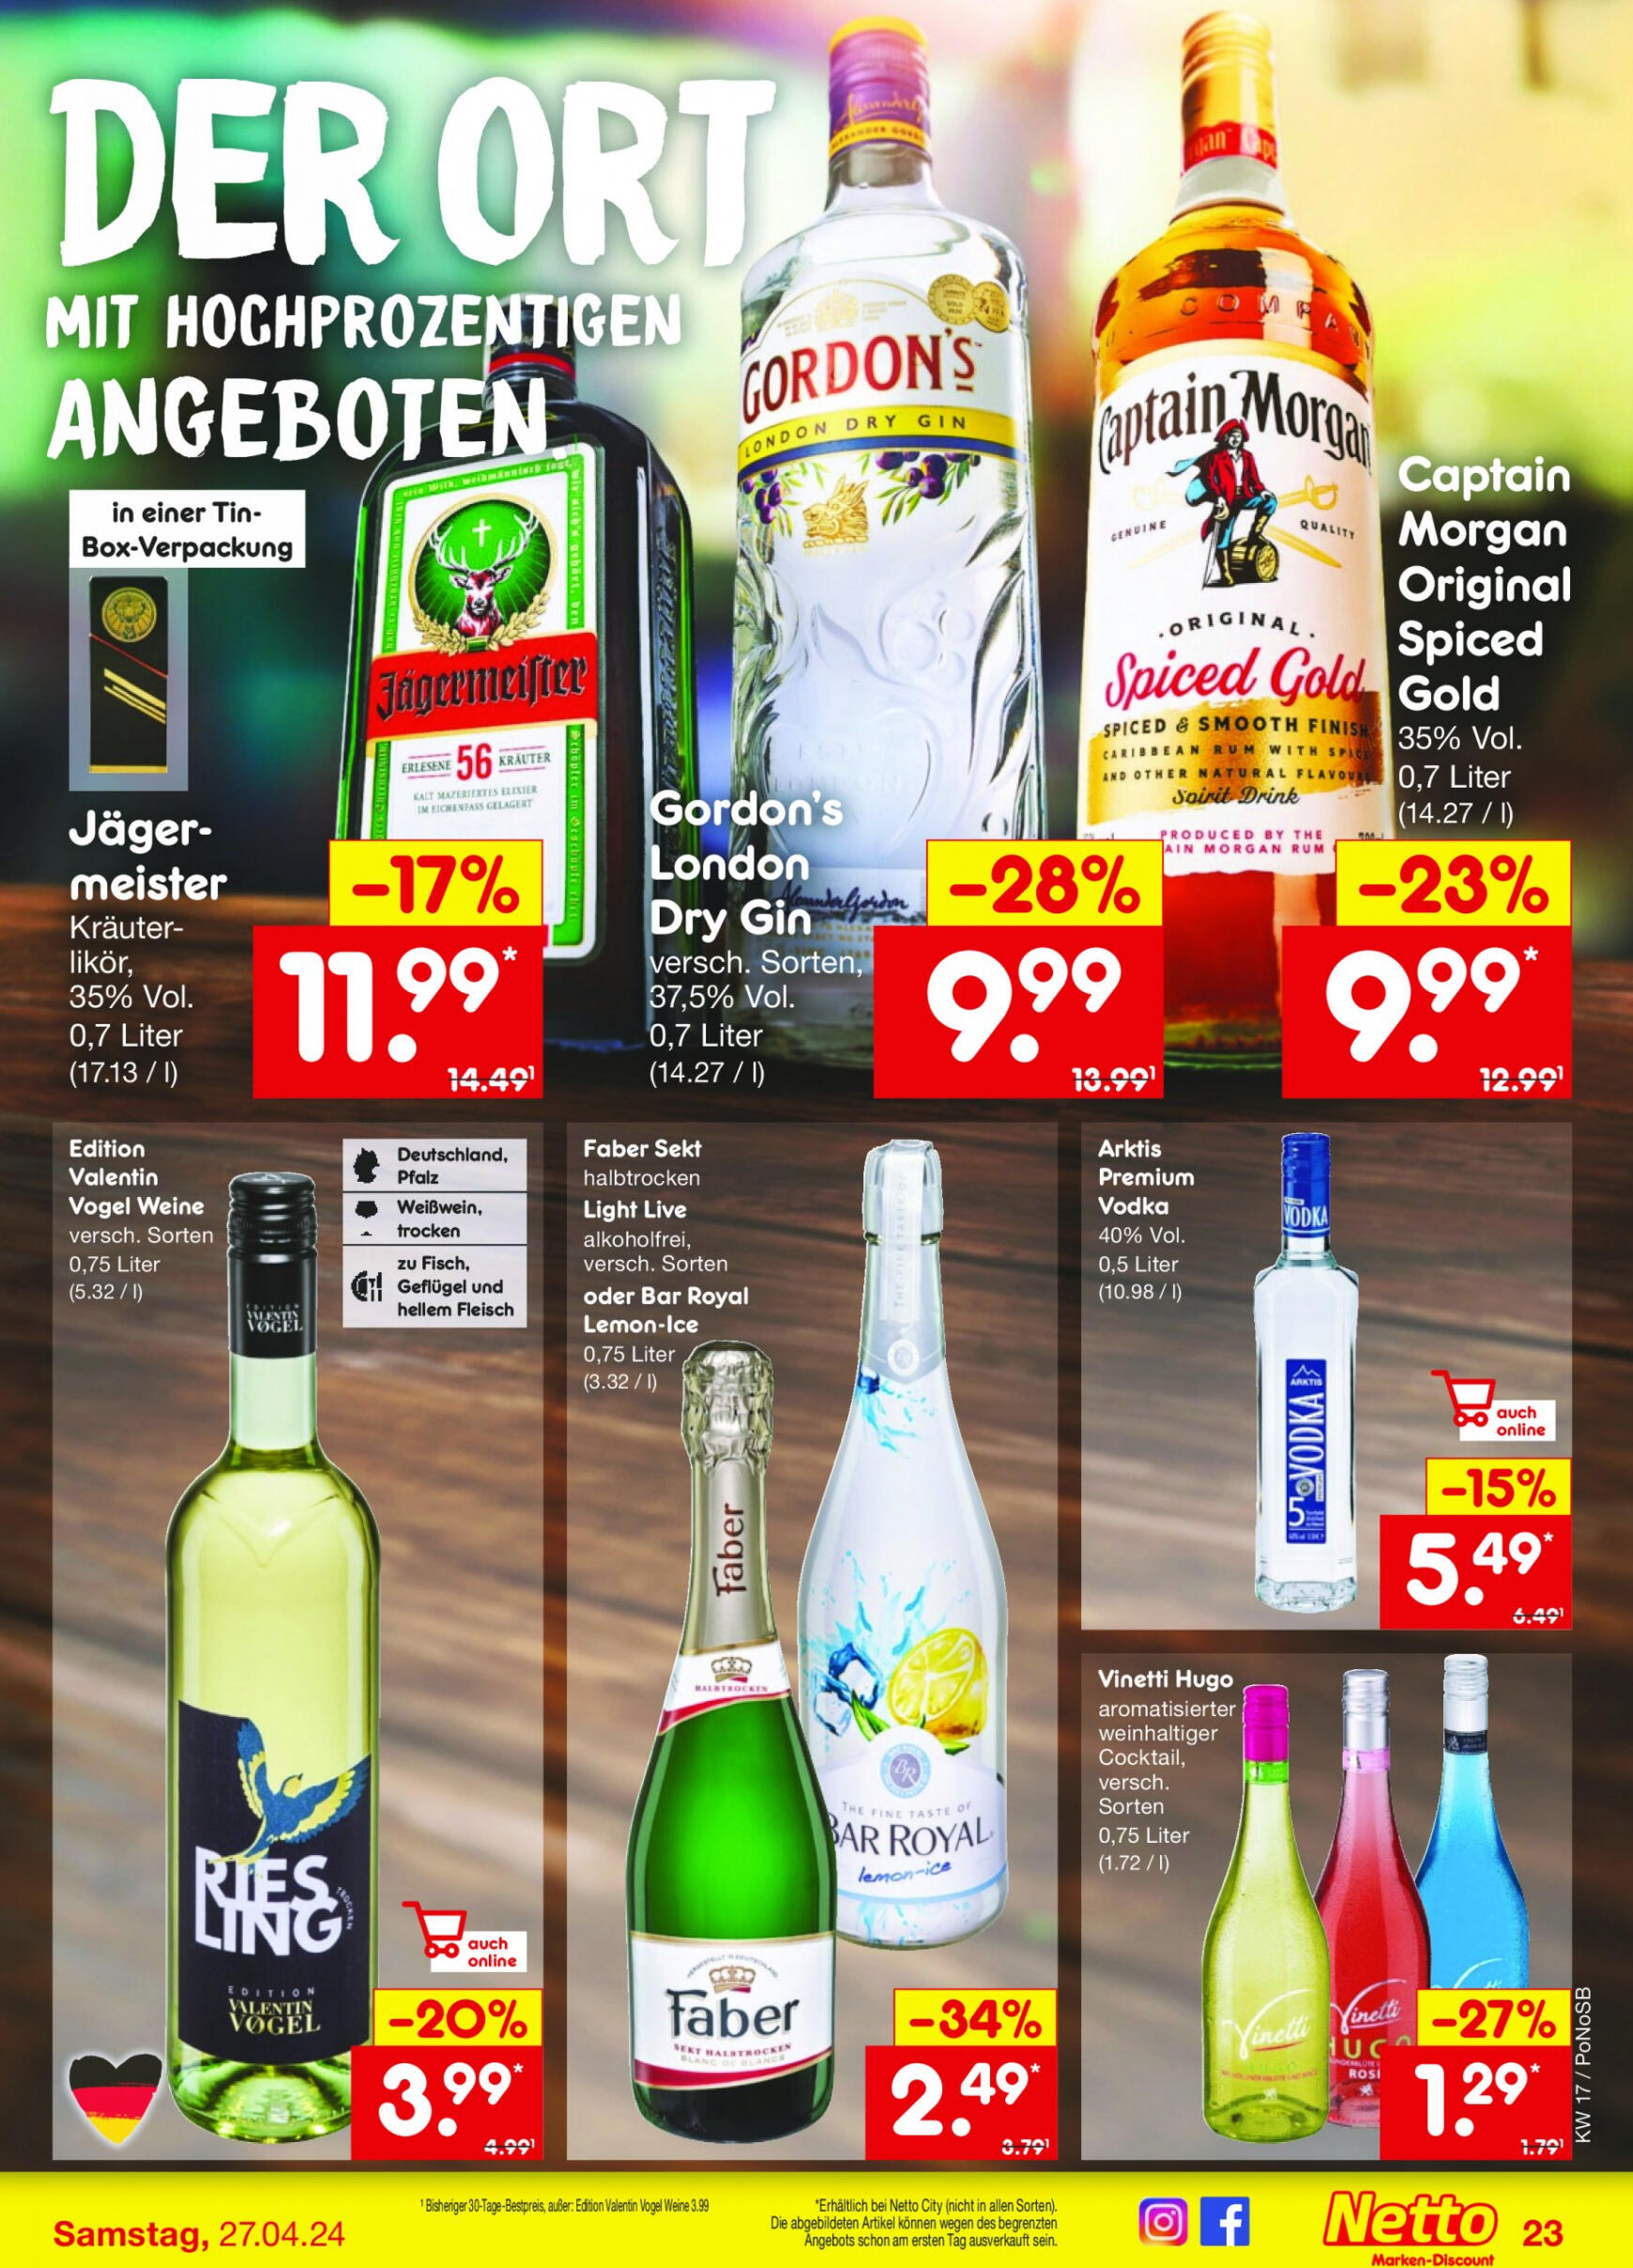 netto - Flyer Netto aktuell 22.04. - 27.04. - page: 25